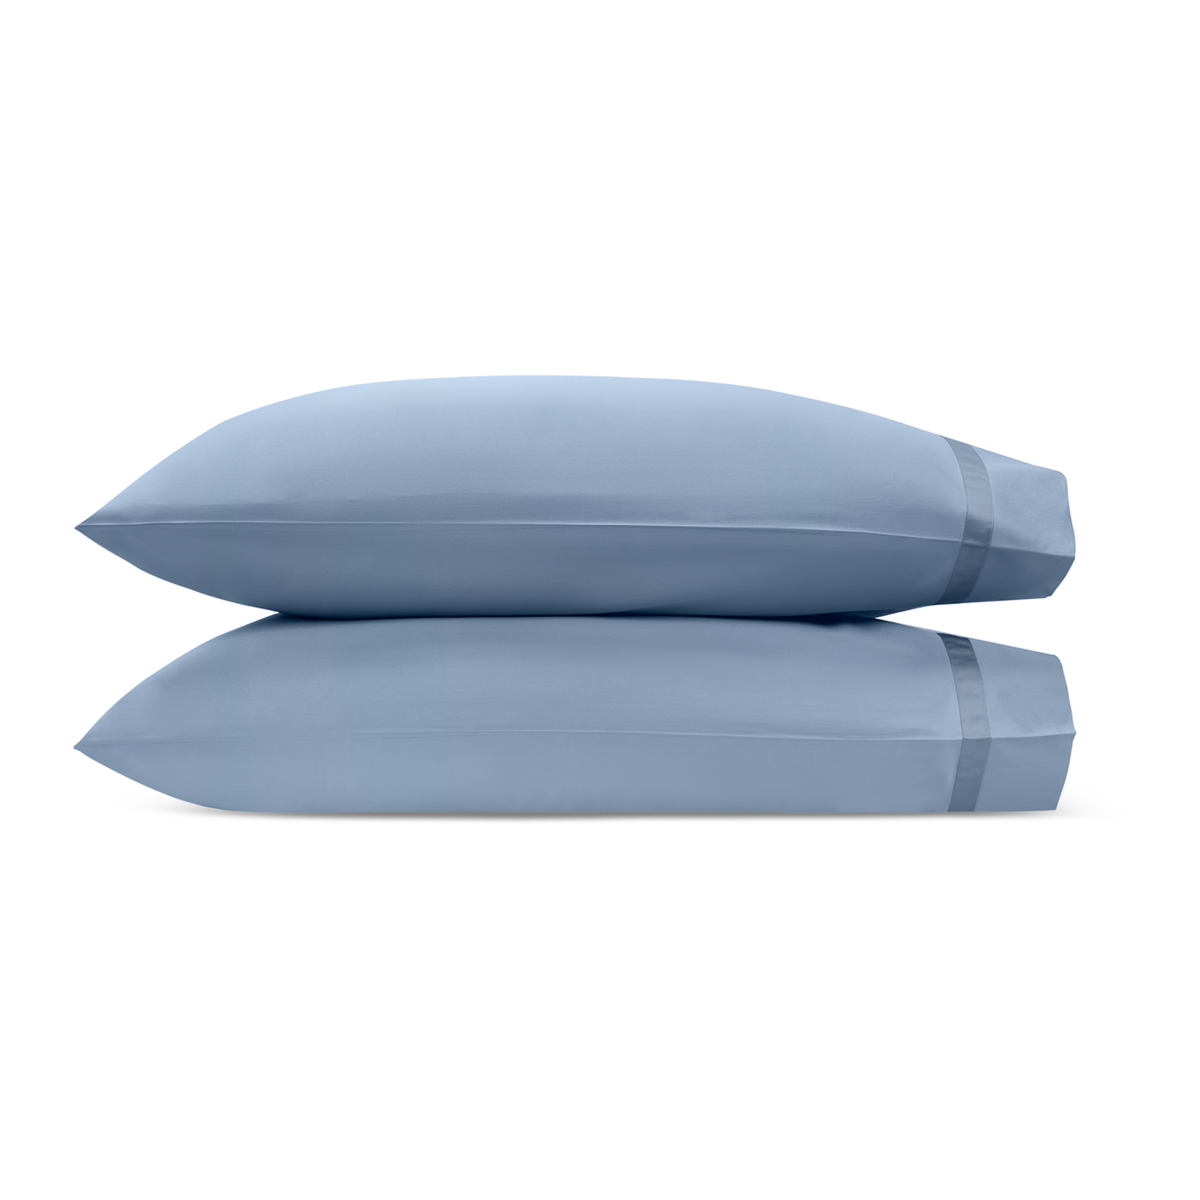 Pair of Pillowcases of Matouk Nocturne Collection Hazy Blue Color